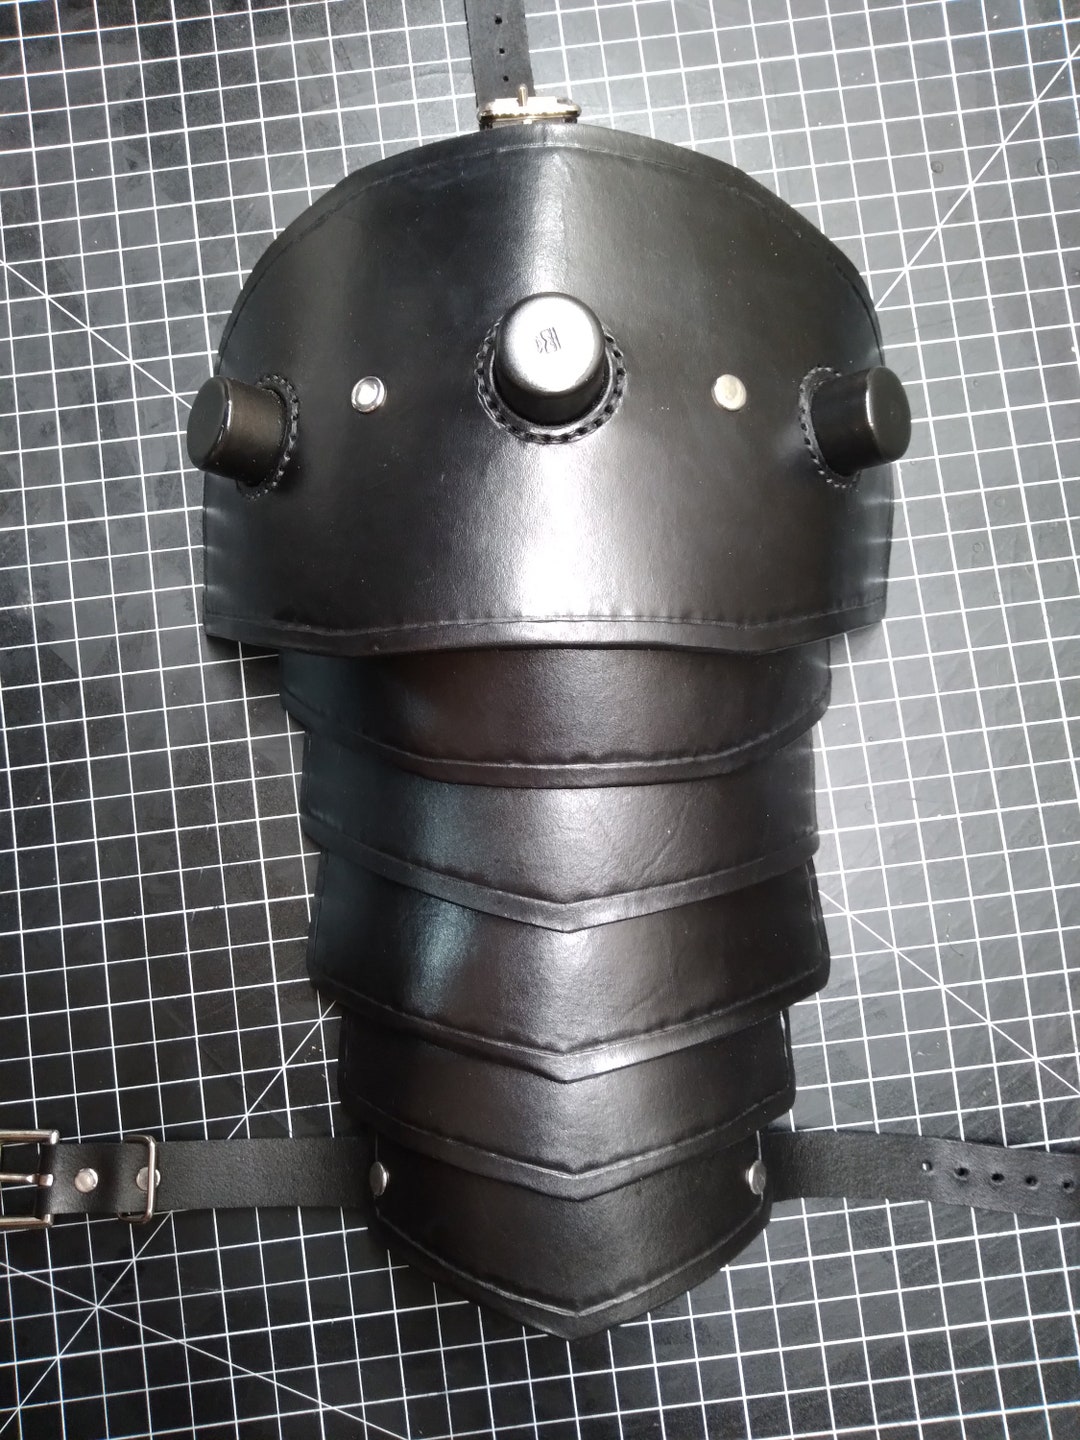 Leather Dystopian Cyberpunk Spaulder Armor With Spikes or - Etsy